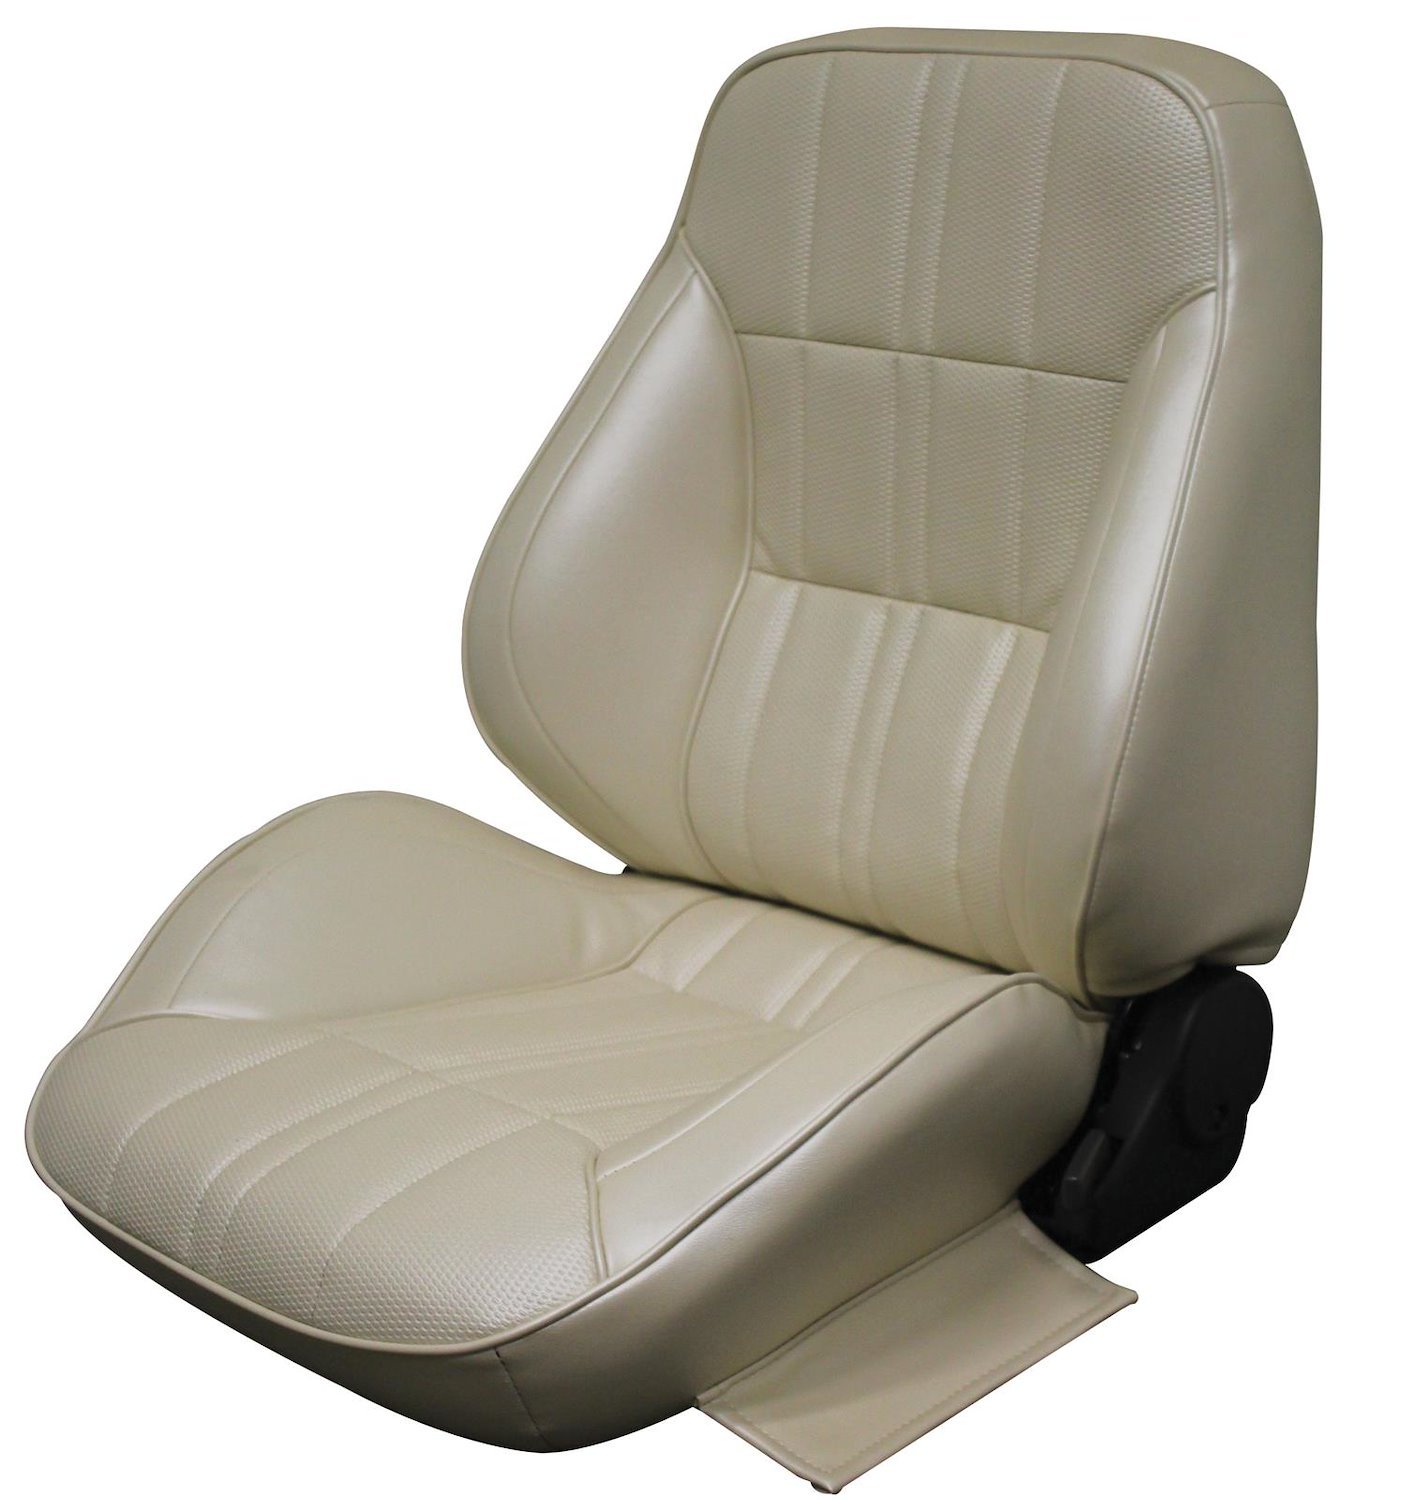 1971-1973 Ford Mustang Deluxe and Grande Green Interior Touring II Preassembled Reclining Front Bucket Seats